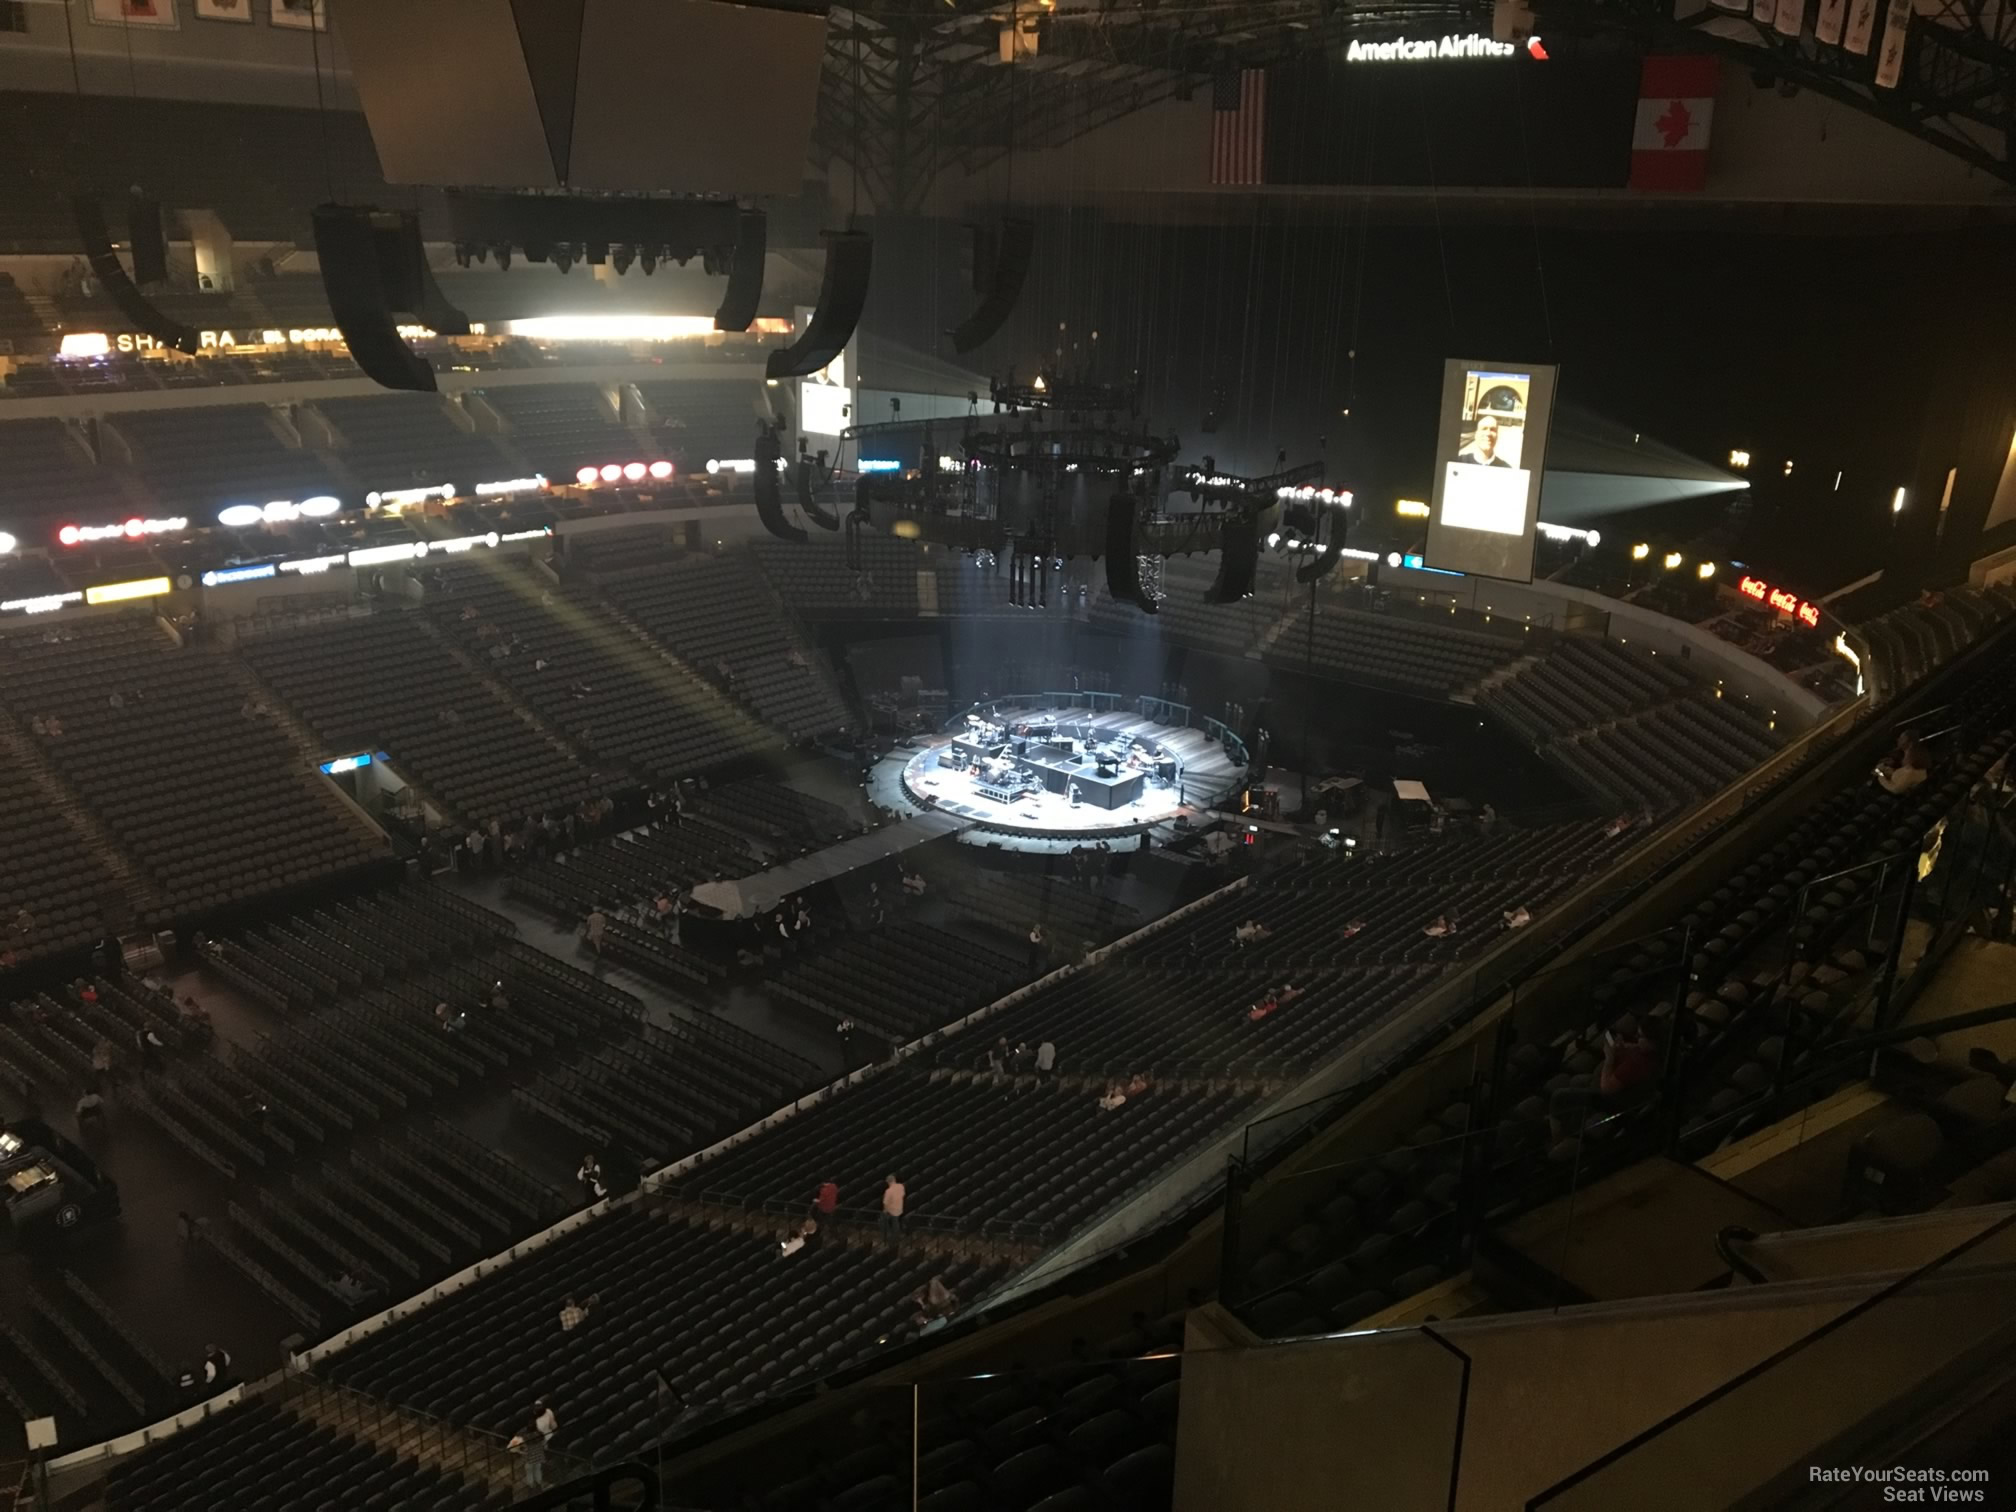 section 314, row k seat view  for concert - american airlines center